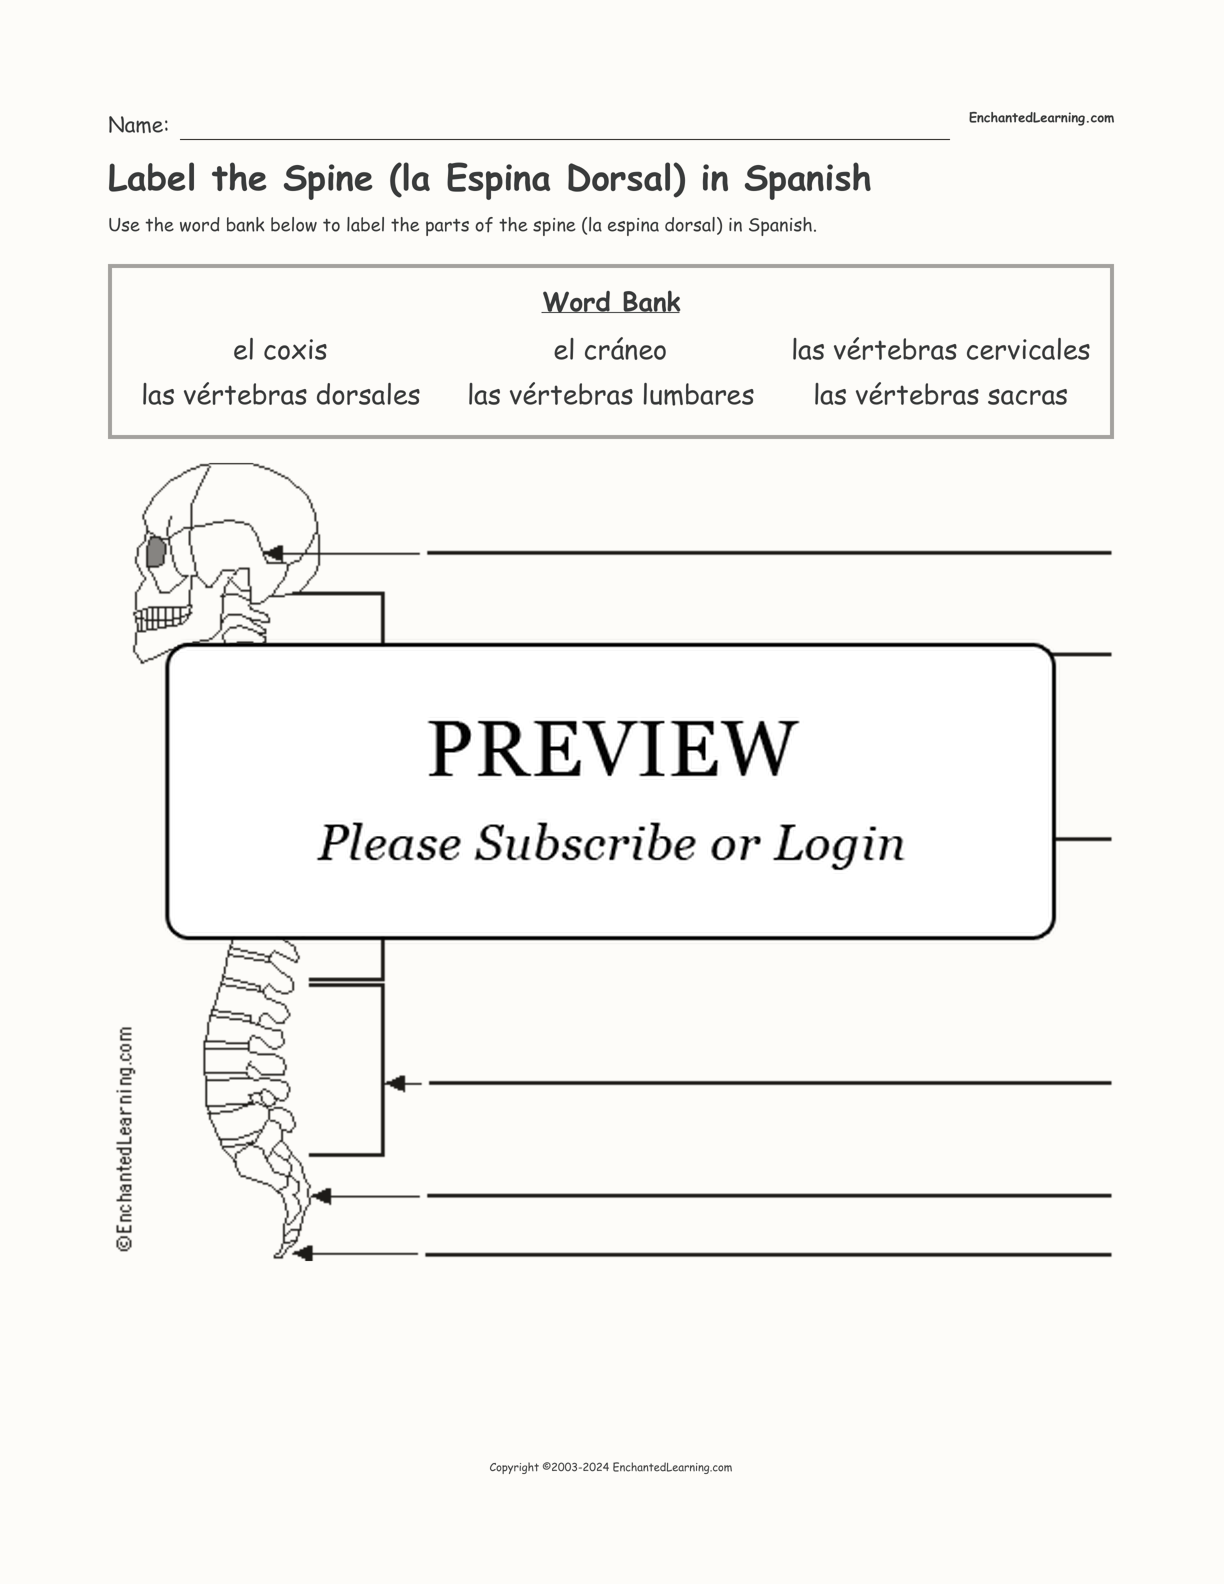 Label the Spine (la Espina Dorsal) in Spanish interactive worksheet page 1